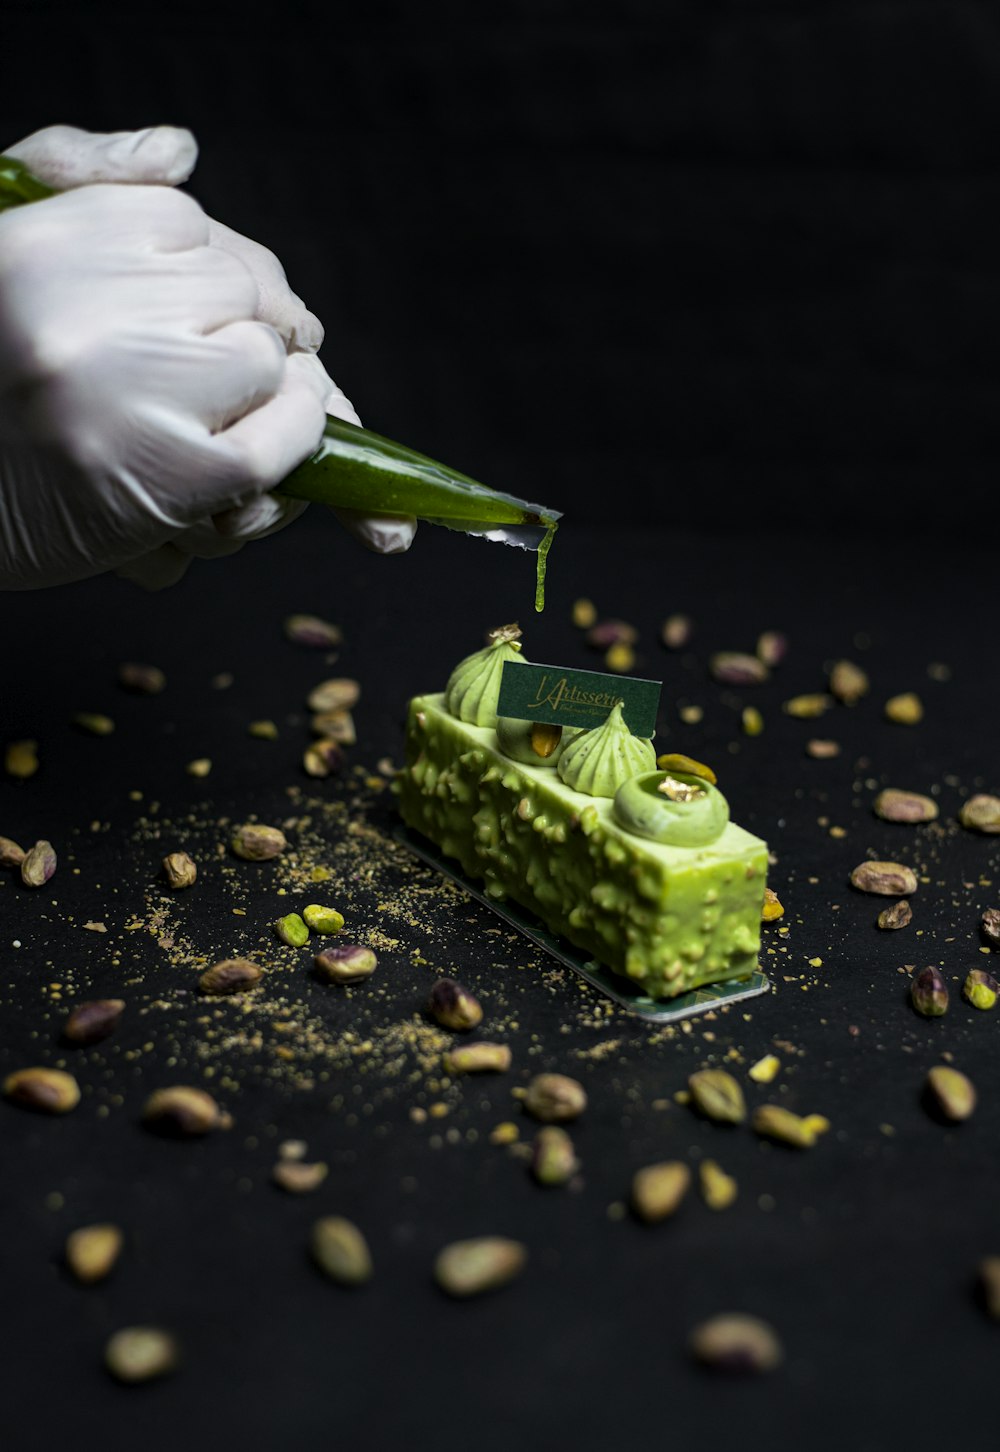 a person in white gloves is putting a green substance on a piece of cake